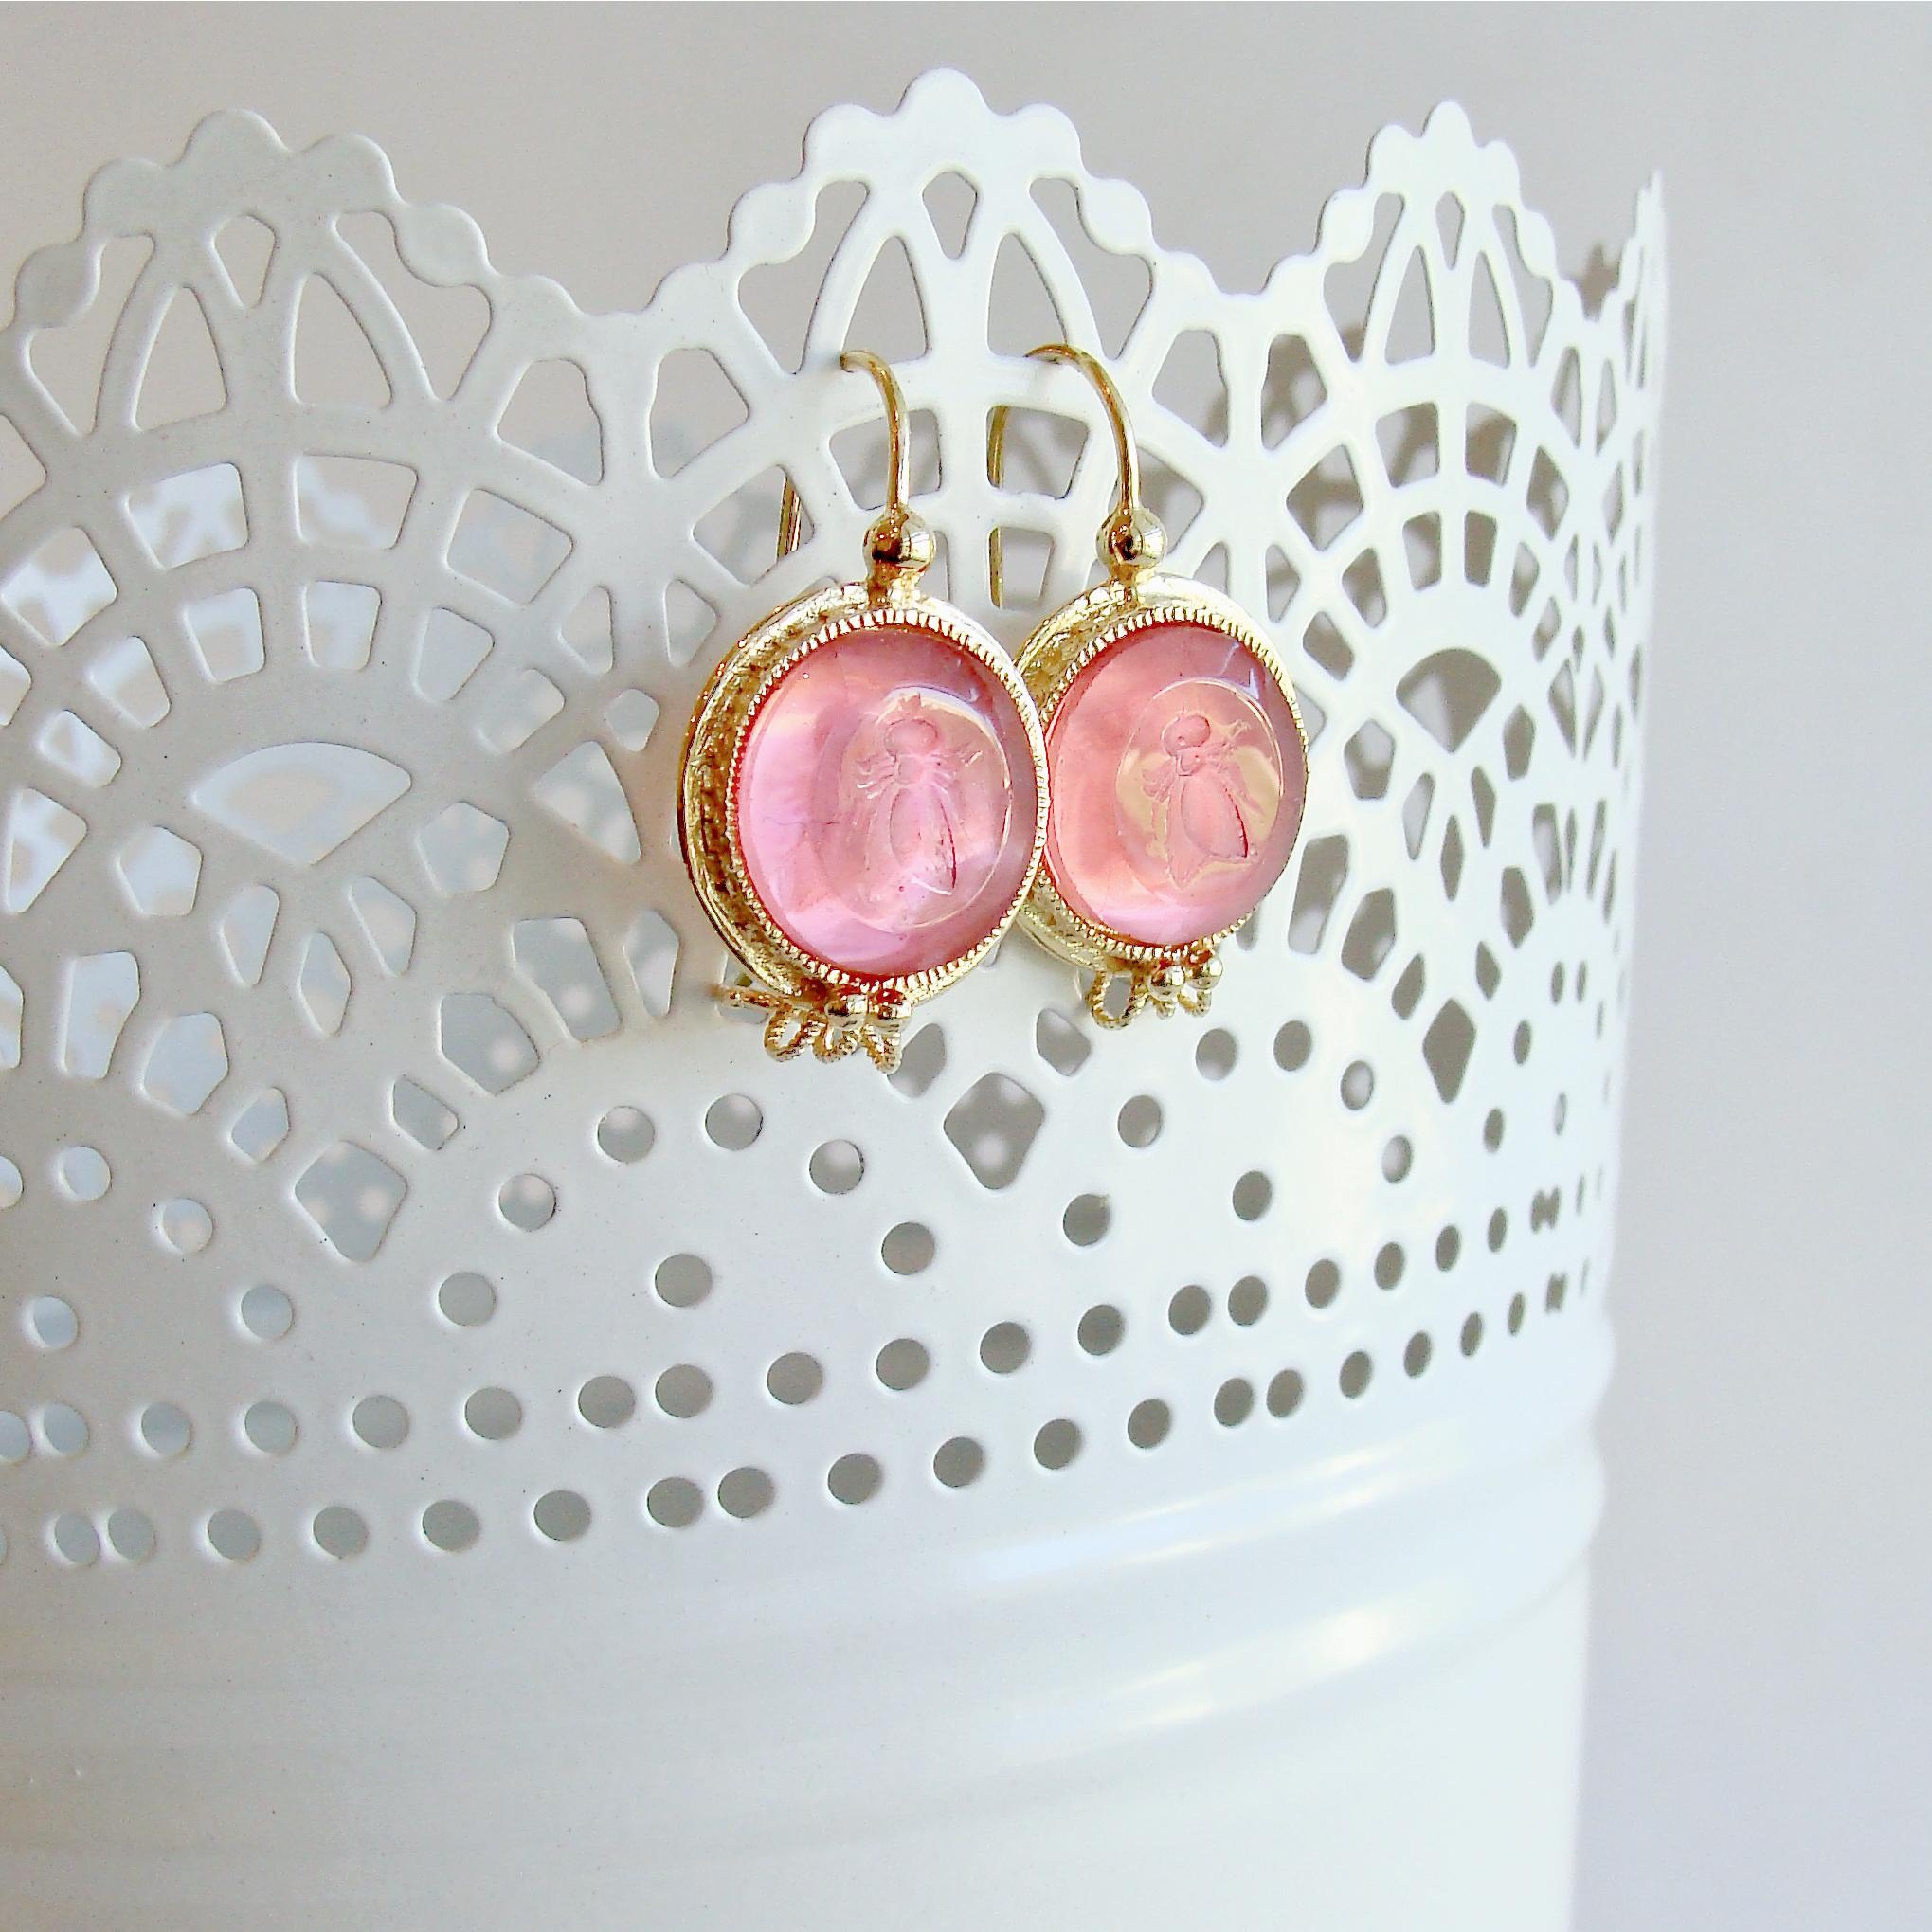 Dainty and  gorgeous salmon pink Venetian glass intaglios of Napoleonic bees are the focal point of these charming earrings.  This classic work of art has been backed with mother-of-pearl and is set in timeless neoclassical gold vermeil mounting. 